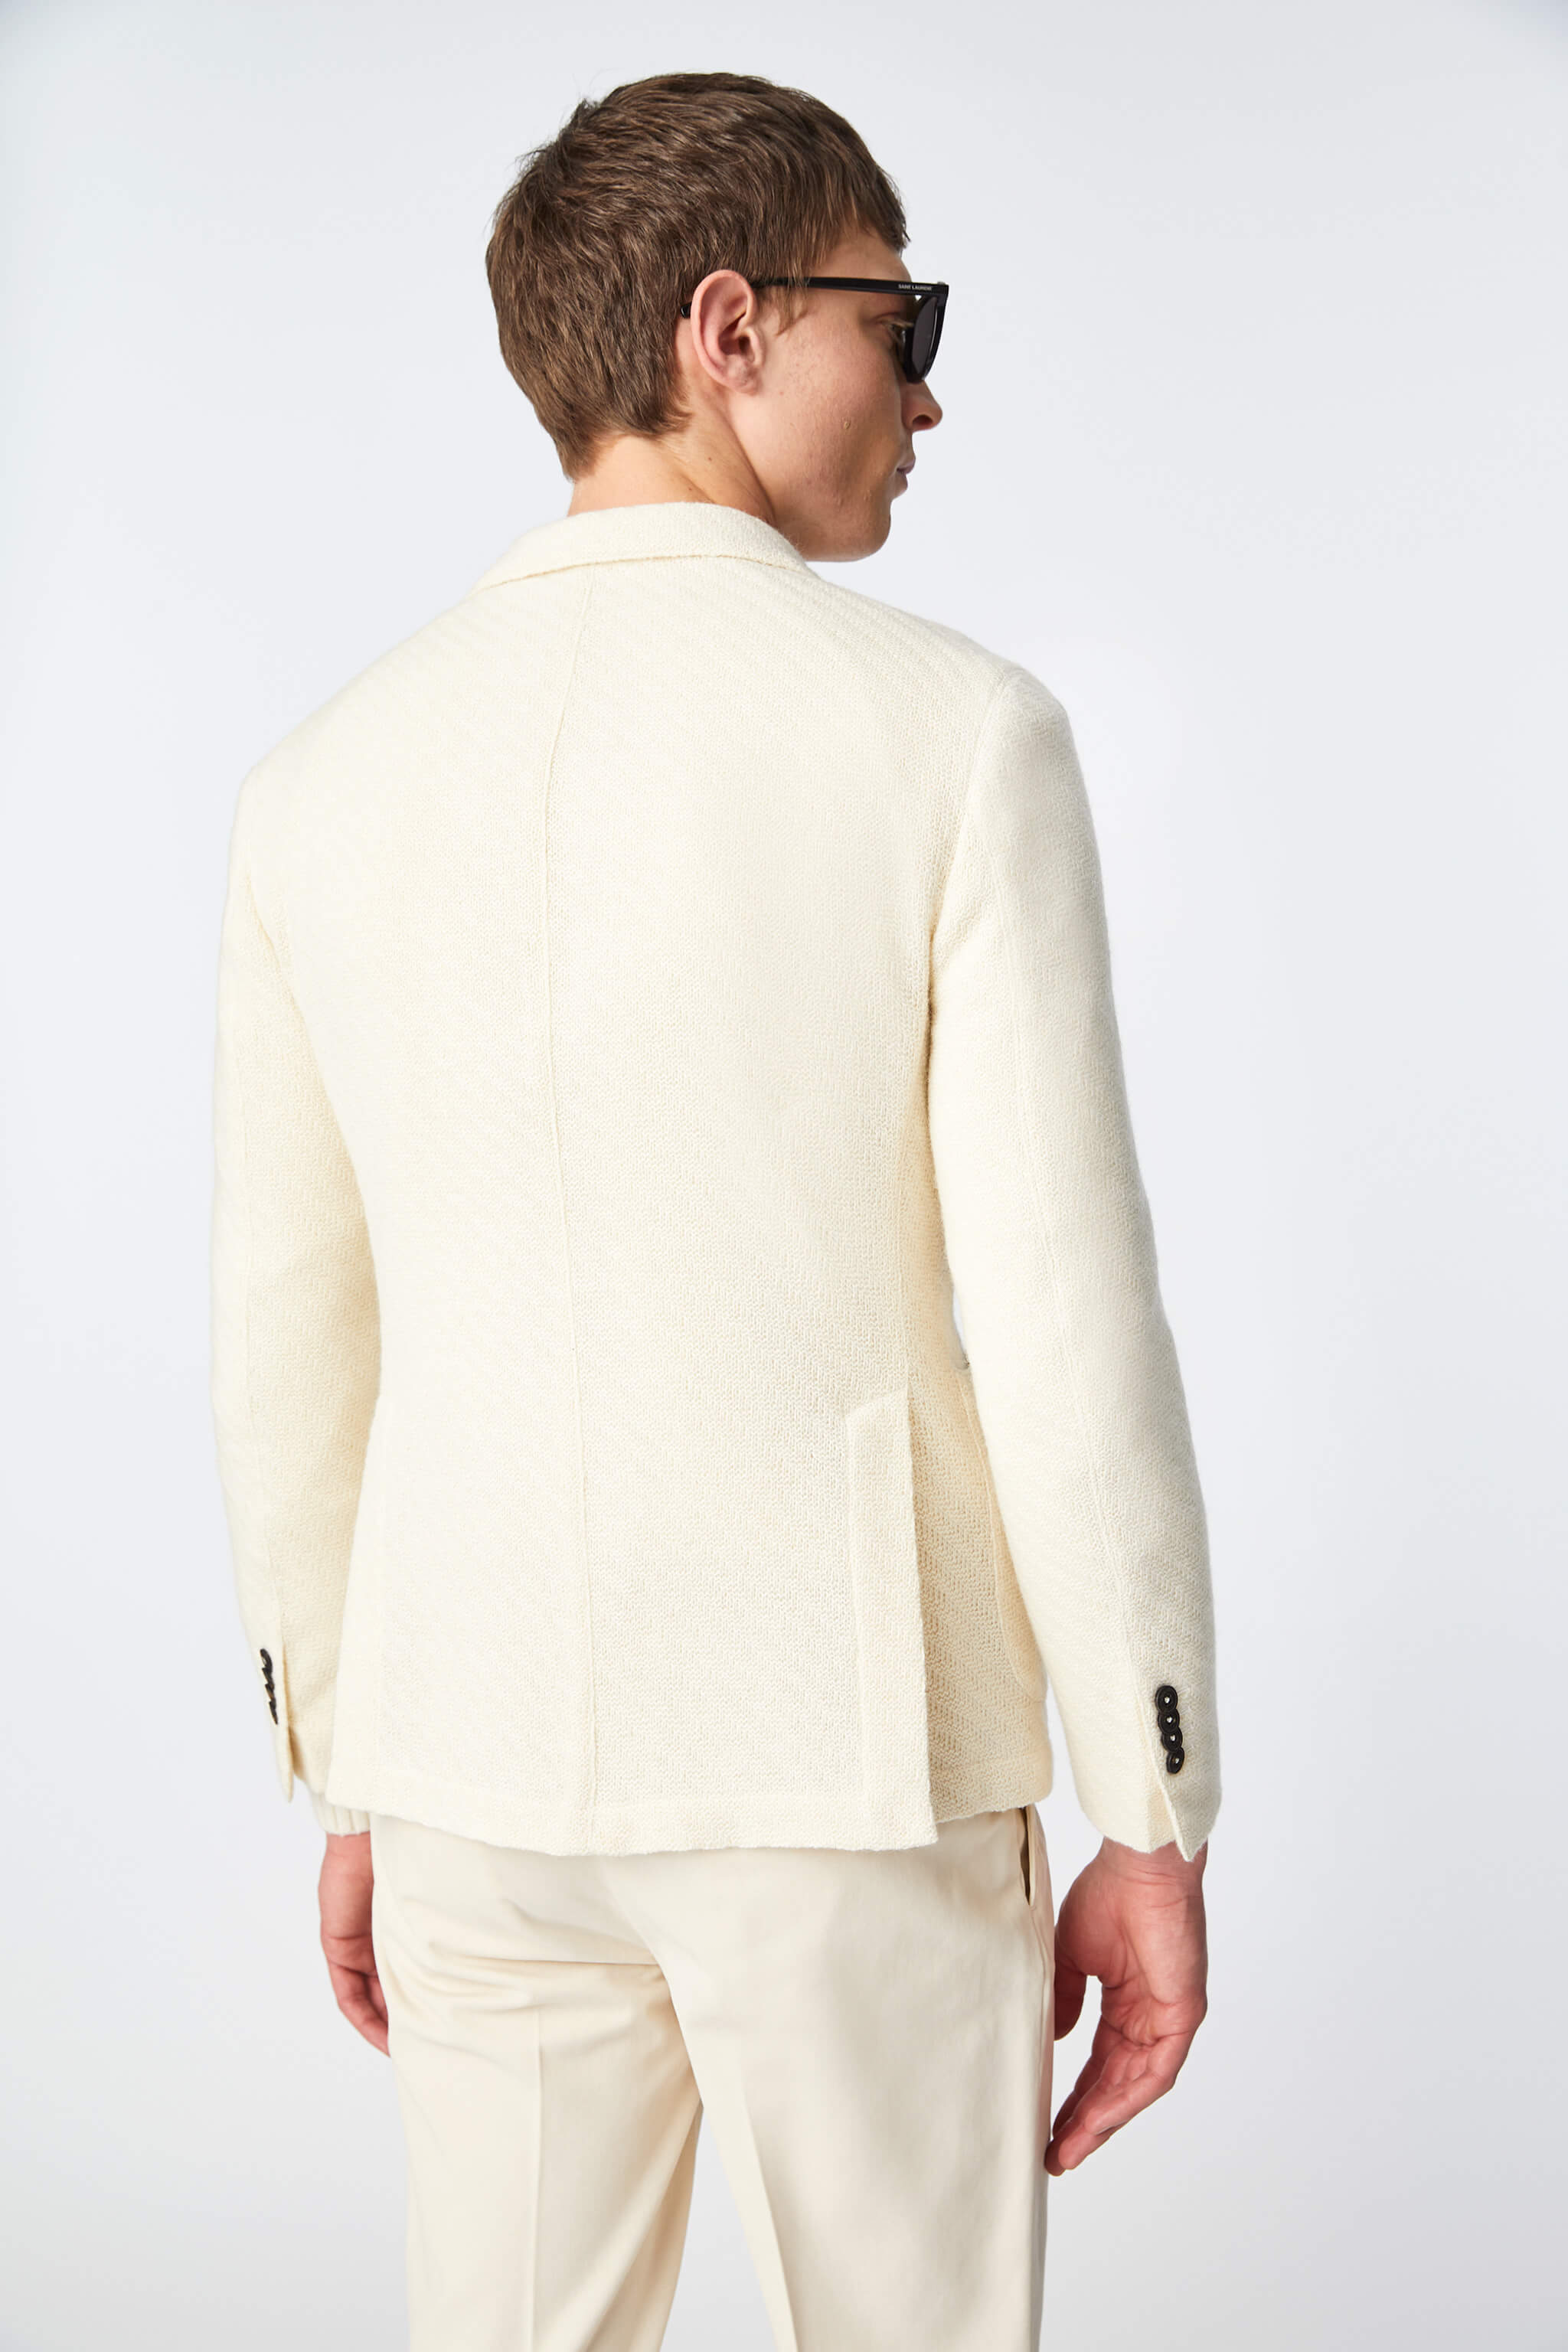 Double-breasted jacket in ivory